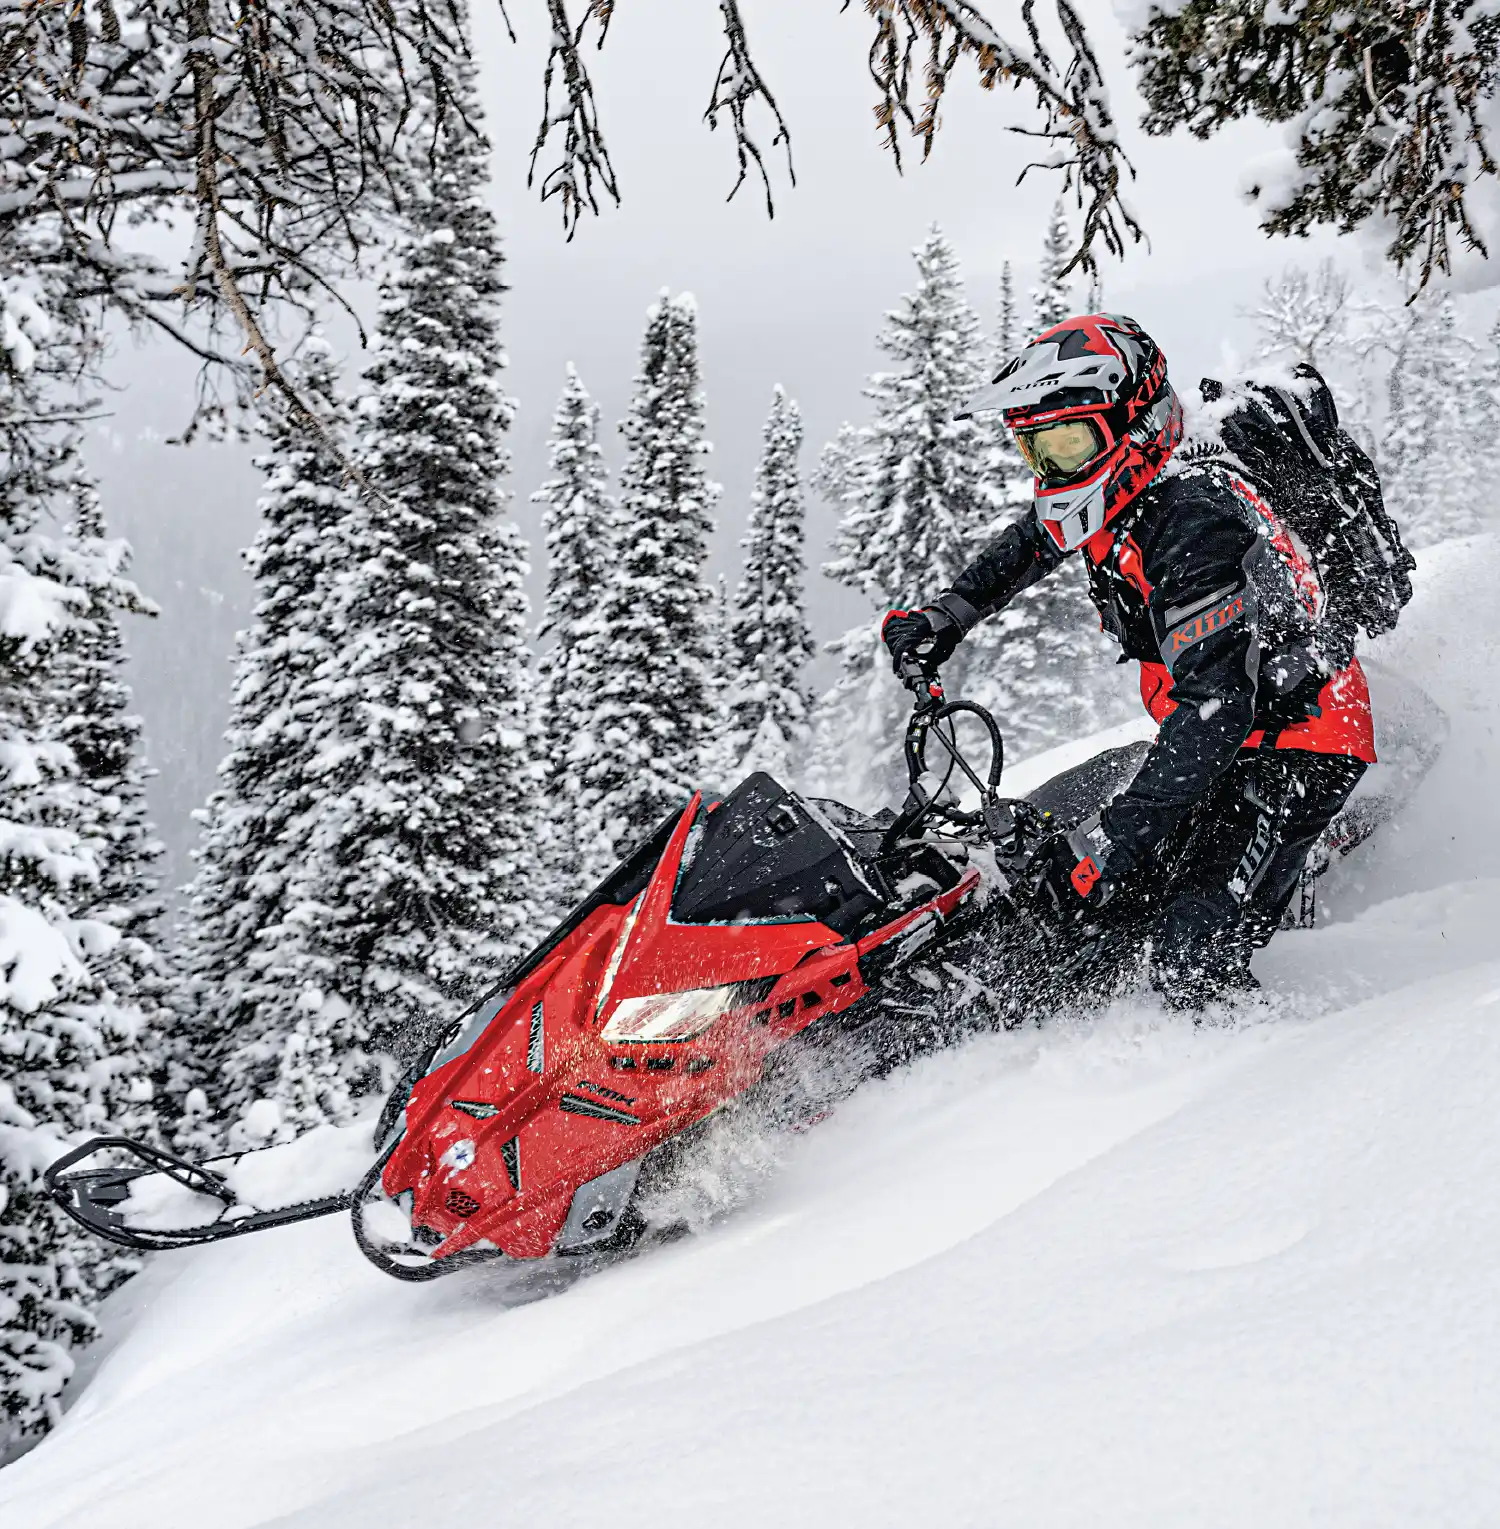 rider taking red snowmobile through trees while wearing a matching red and black snowsuit